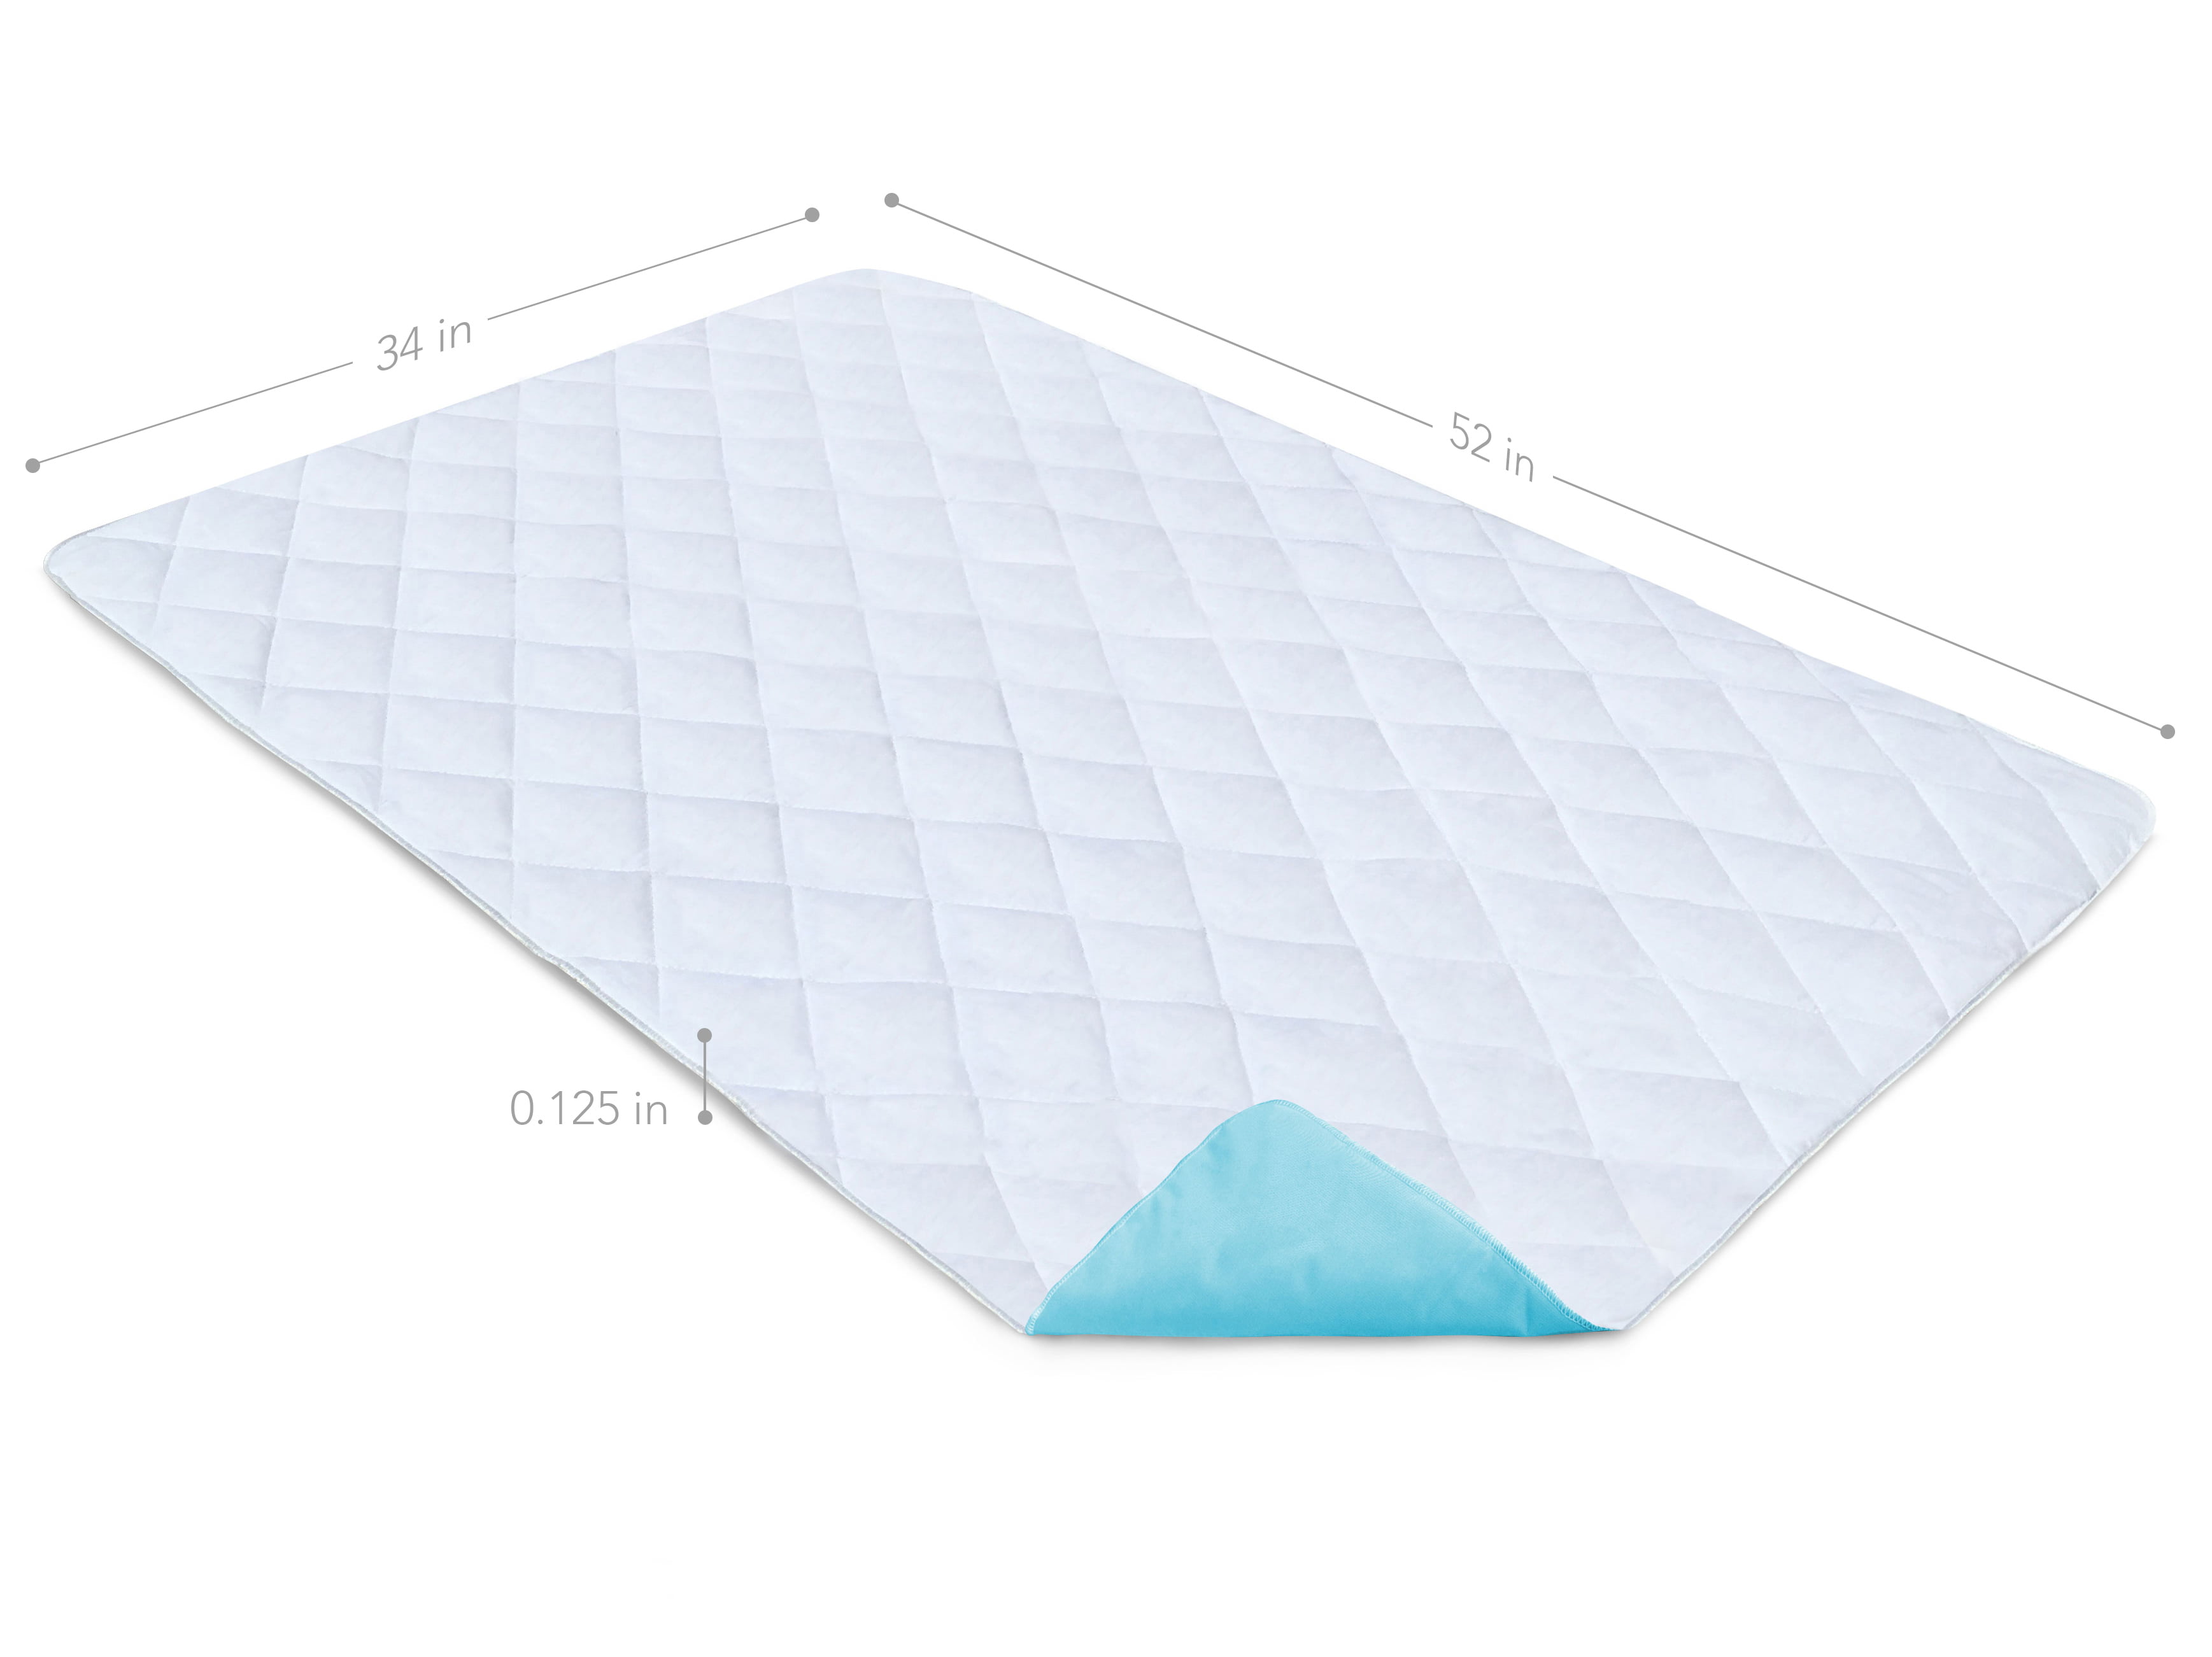 OUTCREATOR 2 Pack Bed Pads for Incontinence,Waterproof Protector Non-Slip  Pads (34 x 54),Machine Washable Absorbency Incontinence Bed Pads for  Toddlers Kids Adults Pets Pee(Blue) Light Blue Grid